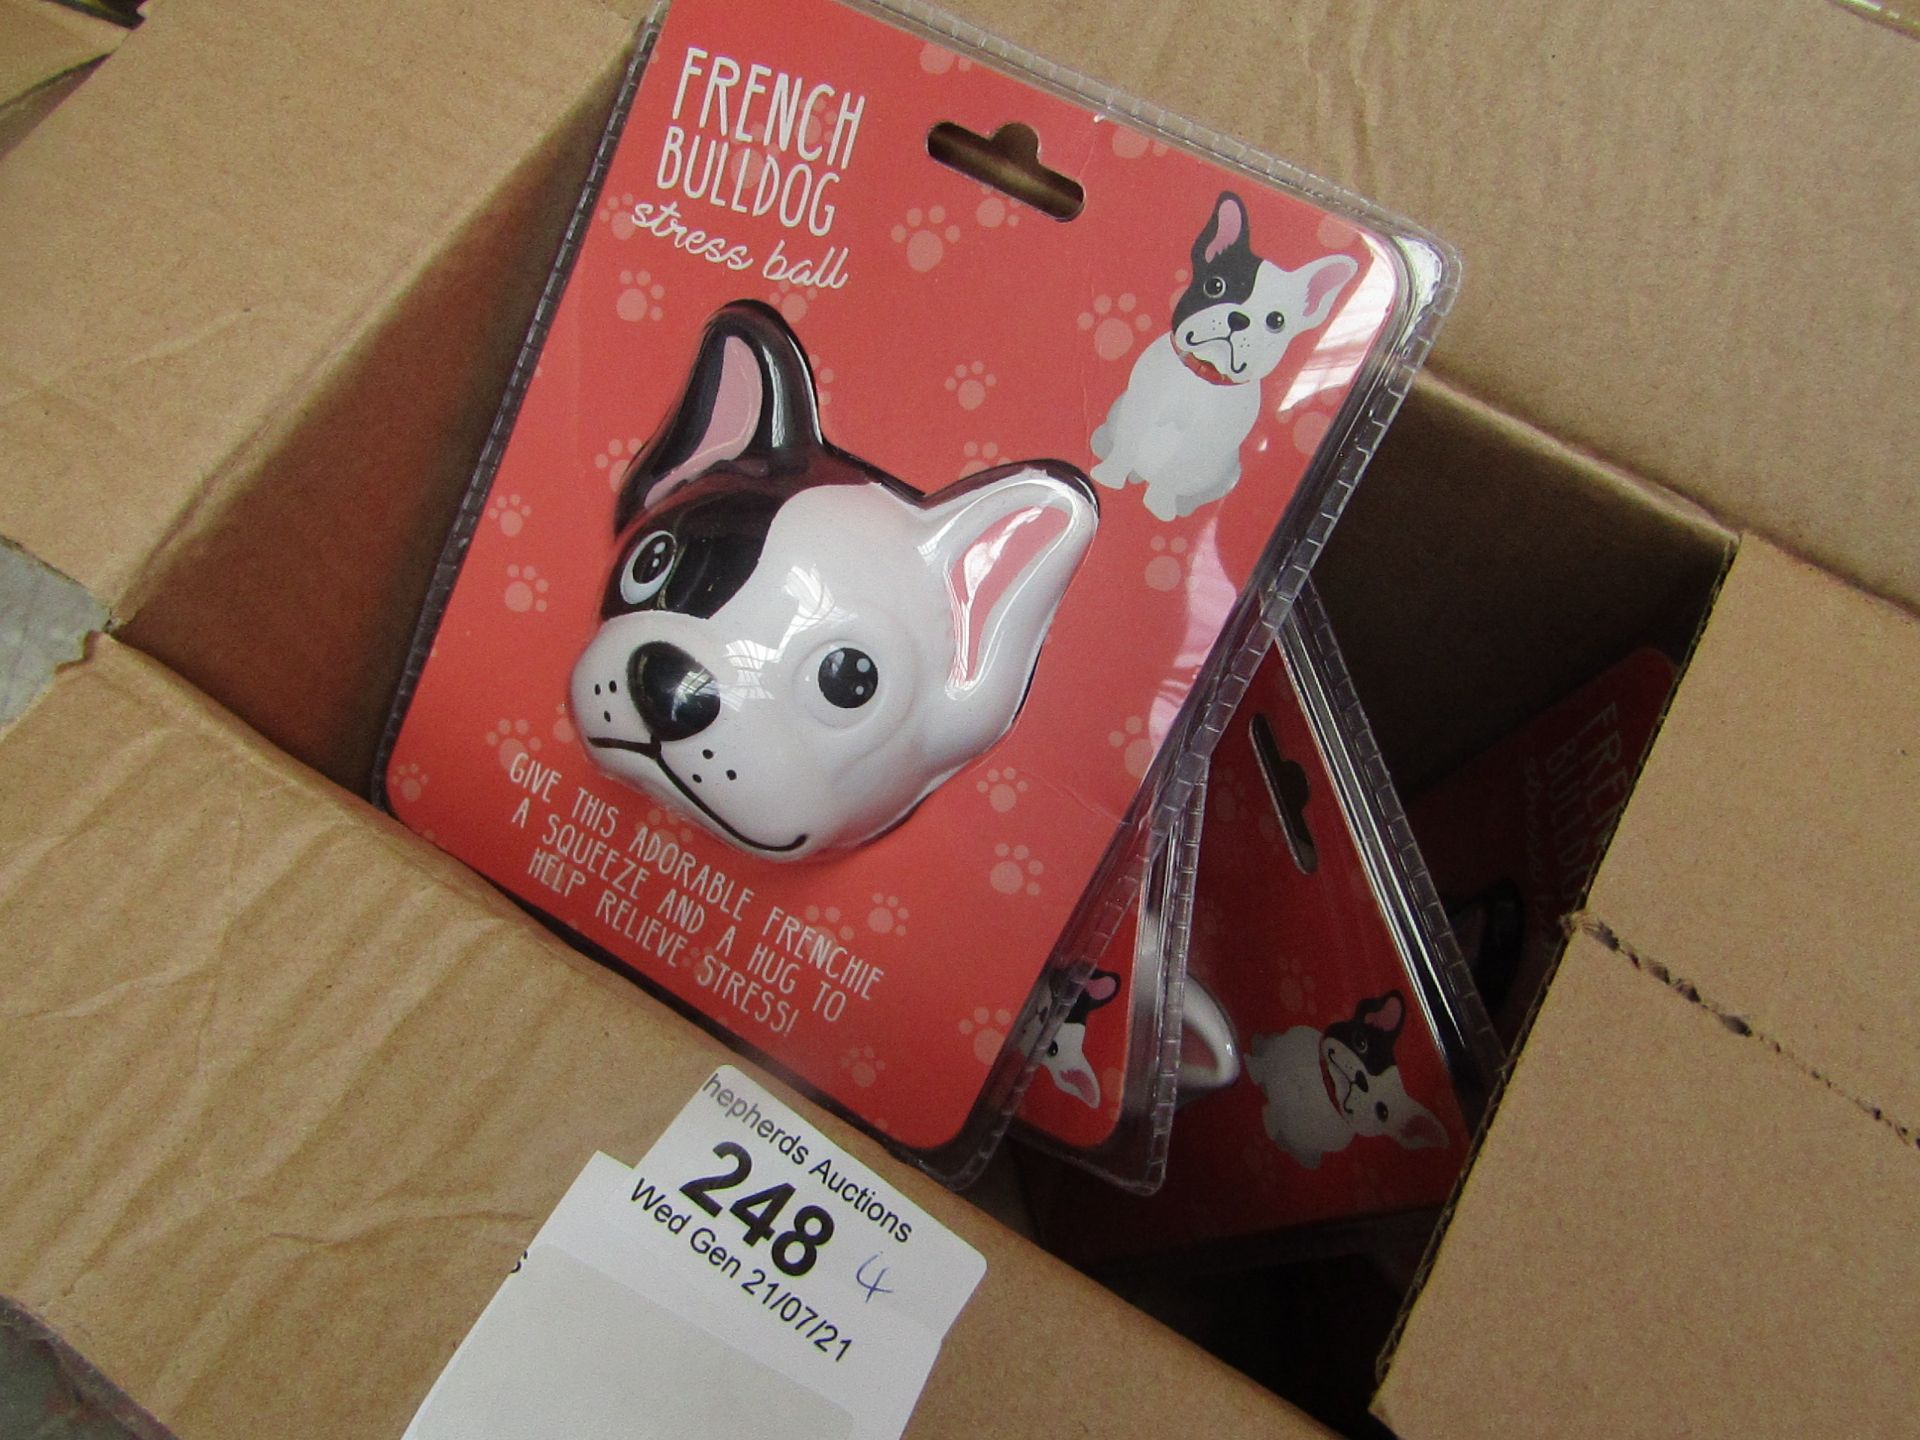 4X FRENCH BULLDOG STRESS BALL, NEW IN PACKAGE